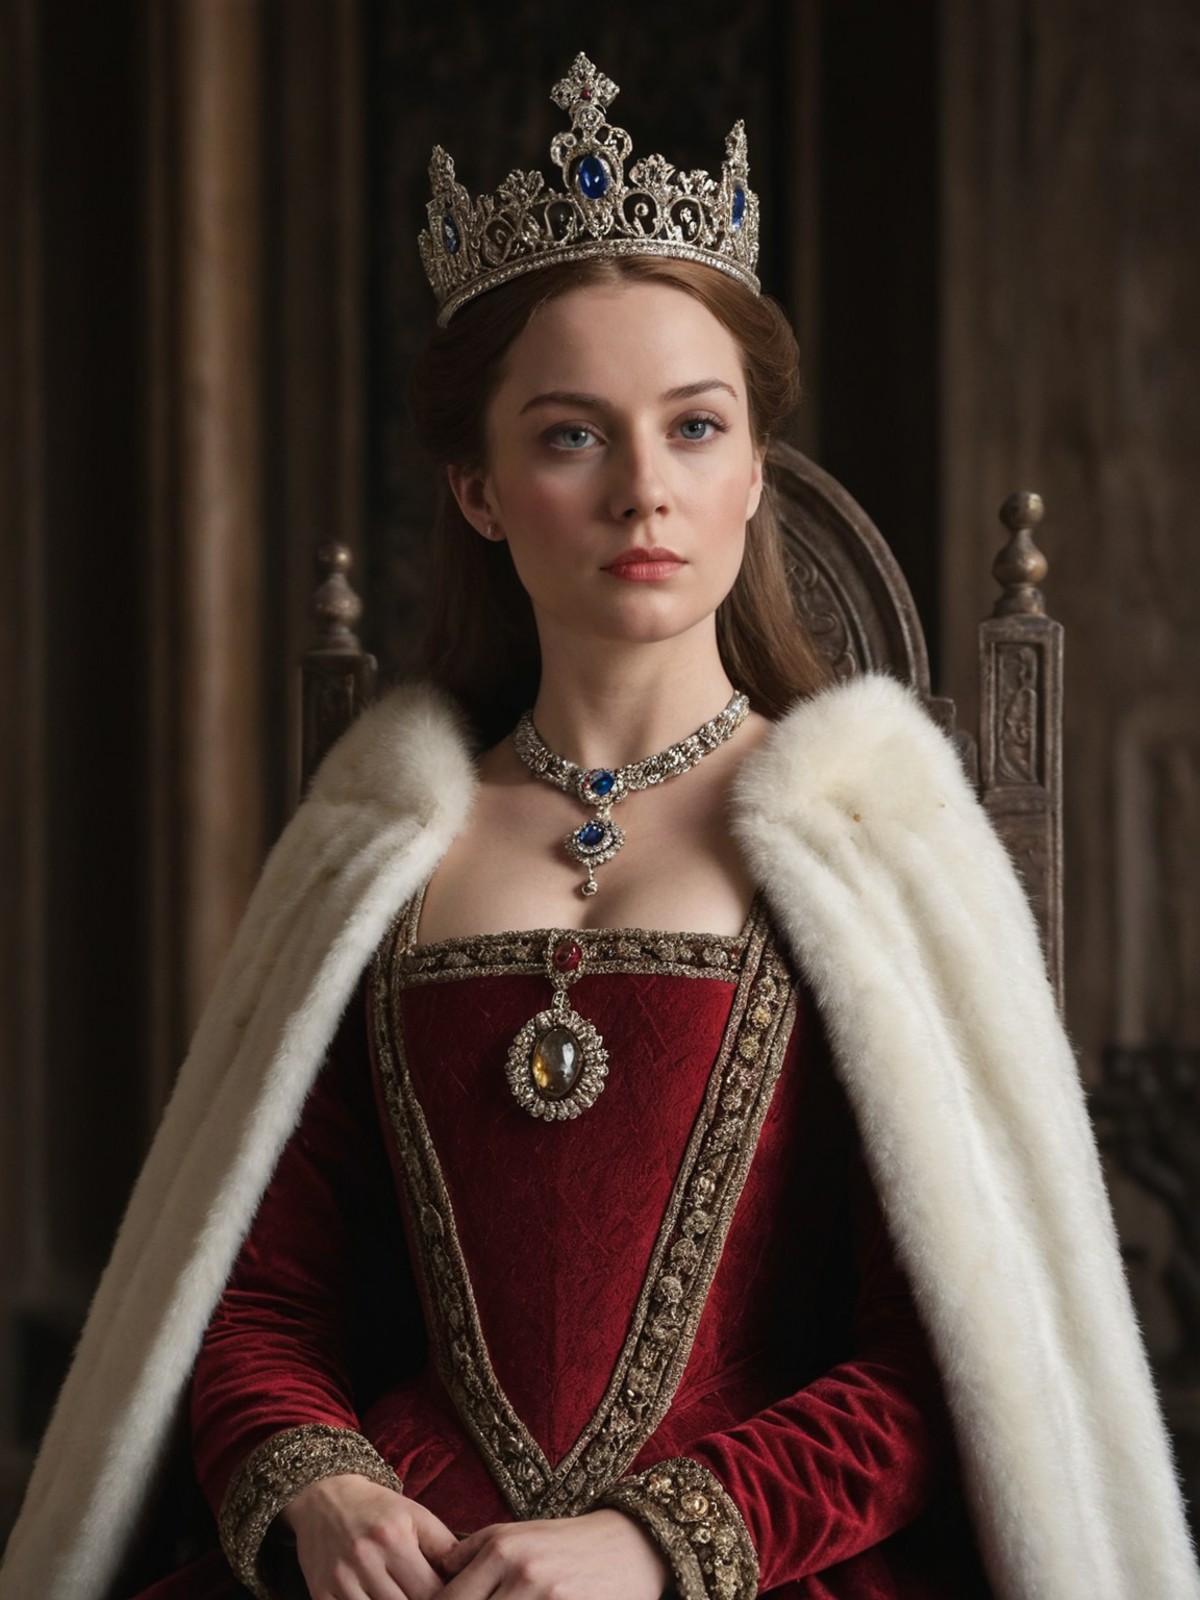 15th century British duke woman,30-year-old,cape,crown,throne room,sinister expression,cinematic still,hyperdetailed photo...